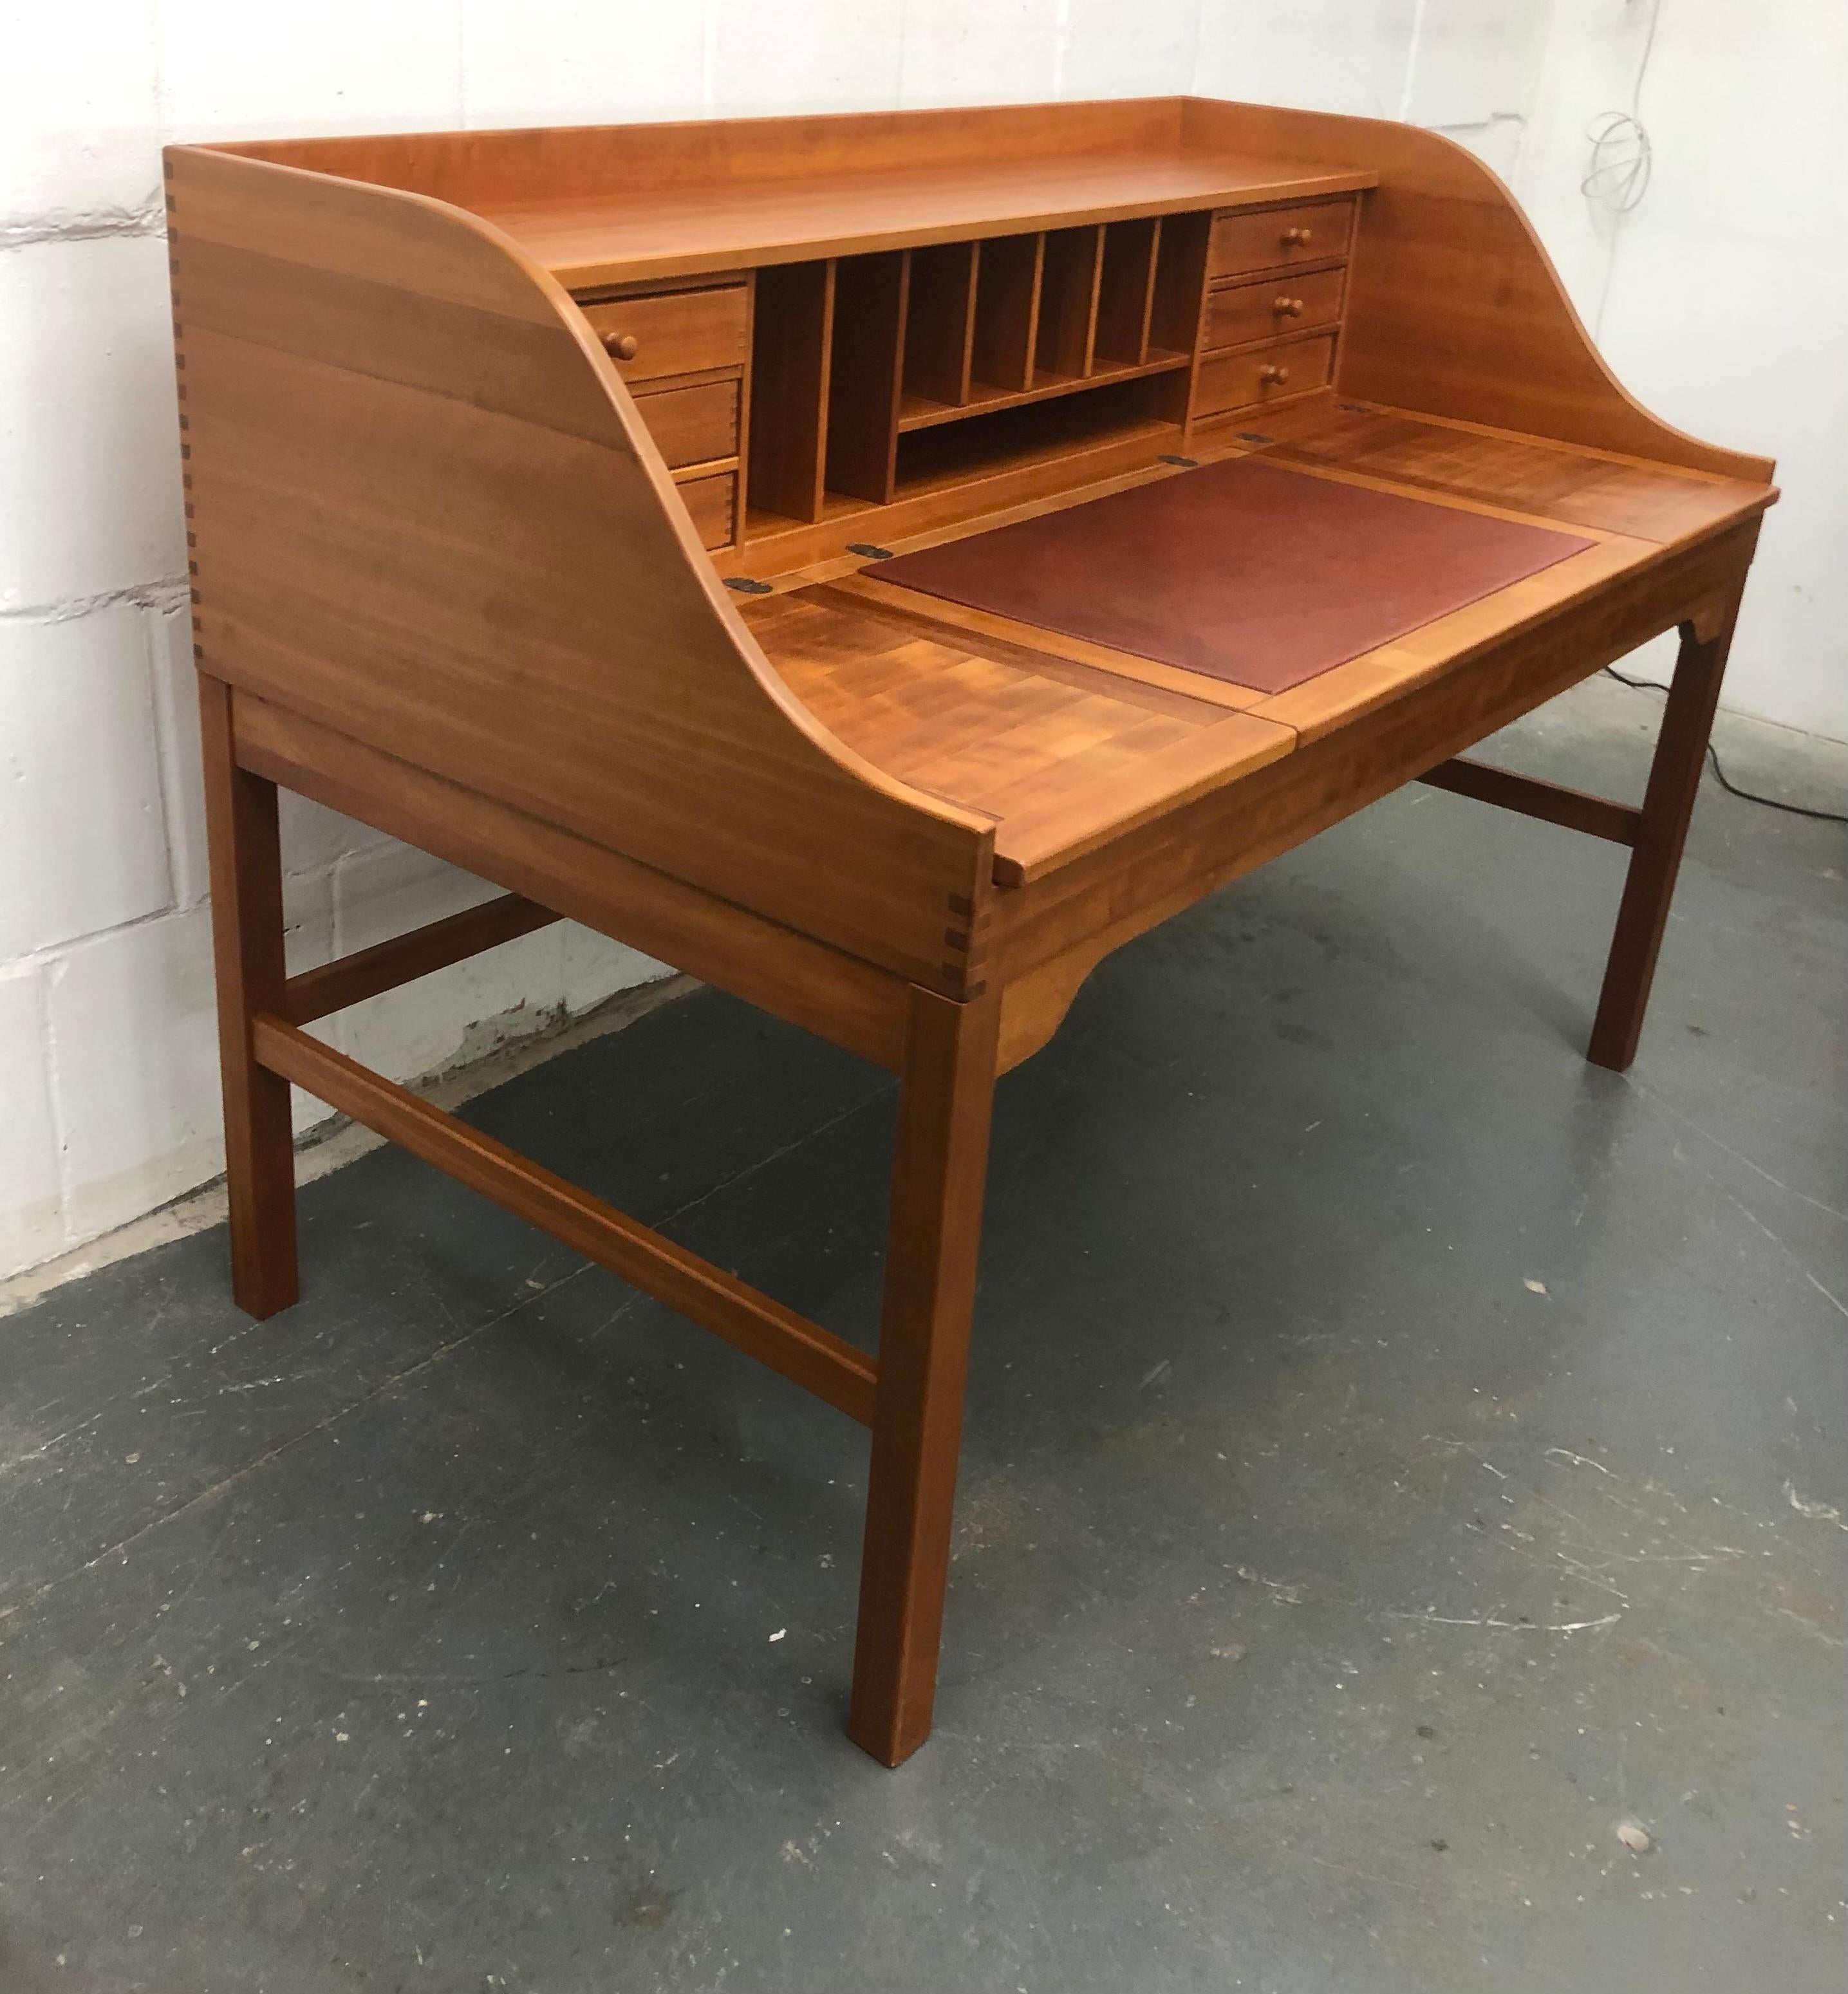 Handsome, masculine cherry wood desk with brass hardware by Andreas Hansen. Nice craftsmanship with beautiful dovetail construction, 6 small drawers and storage areas, 3 flip-up panels with storage beneath, and deep red leather writing blotter. The